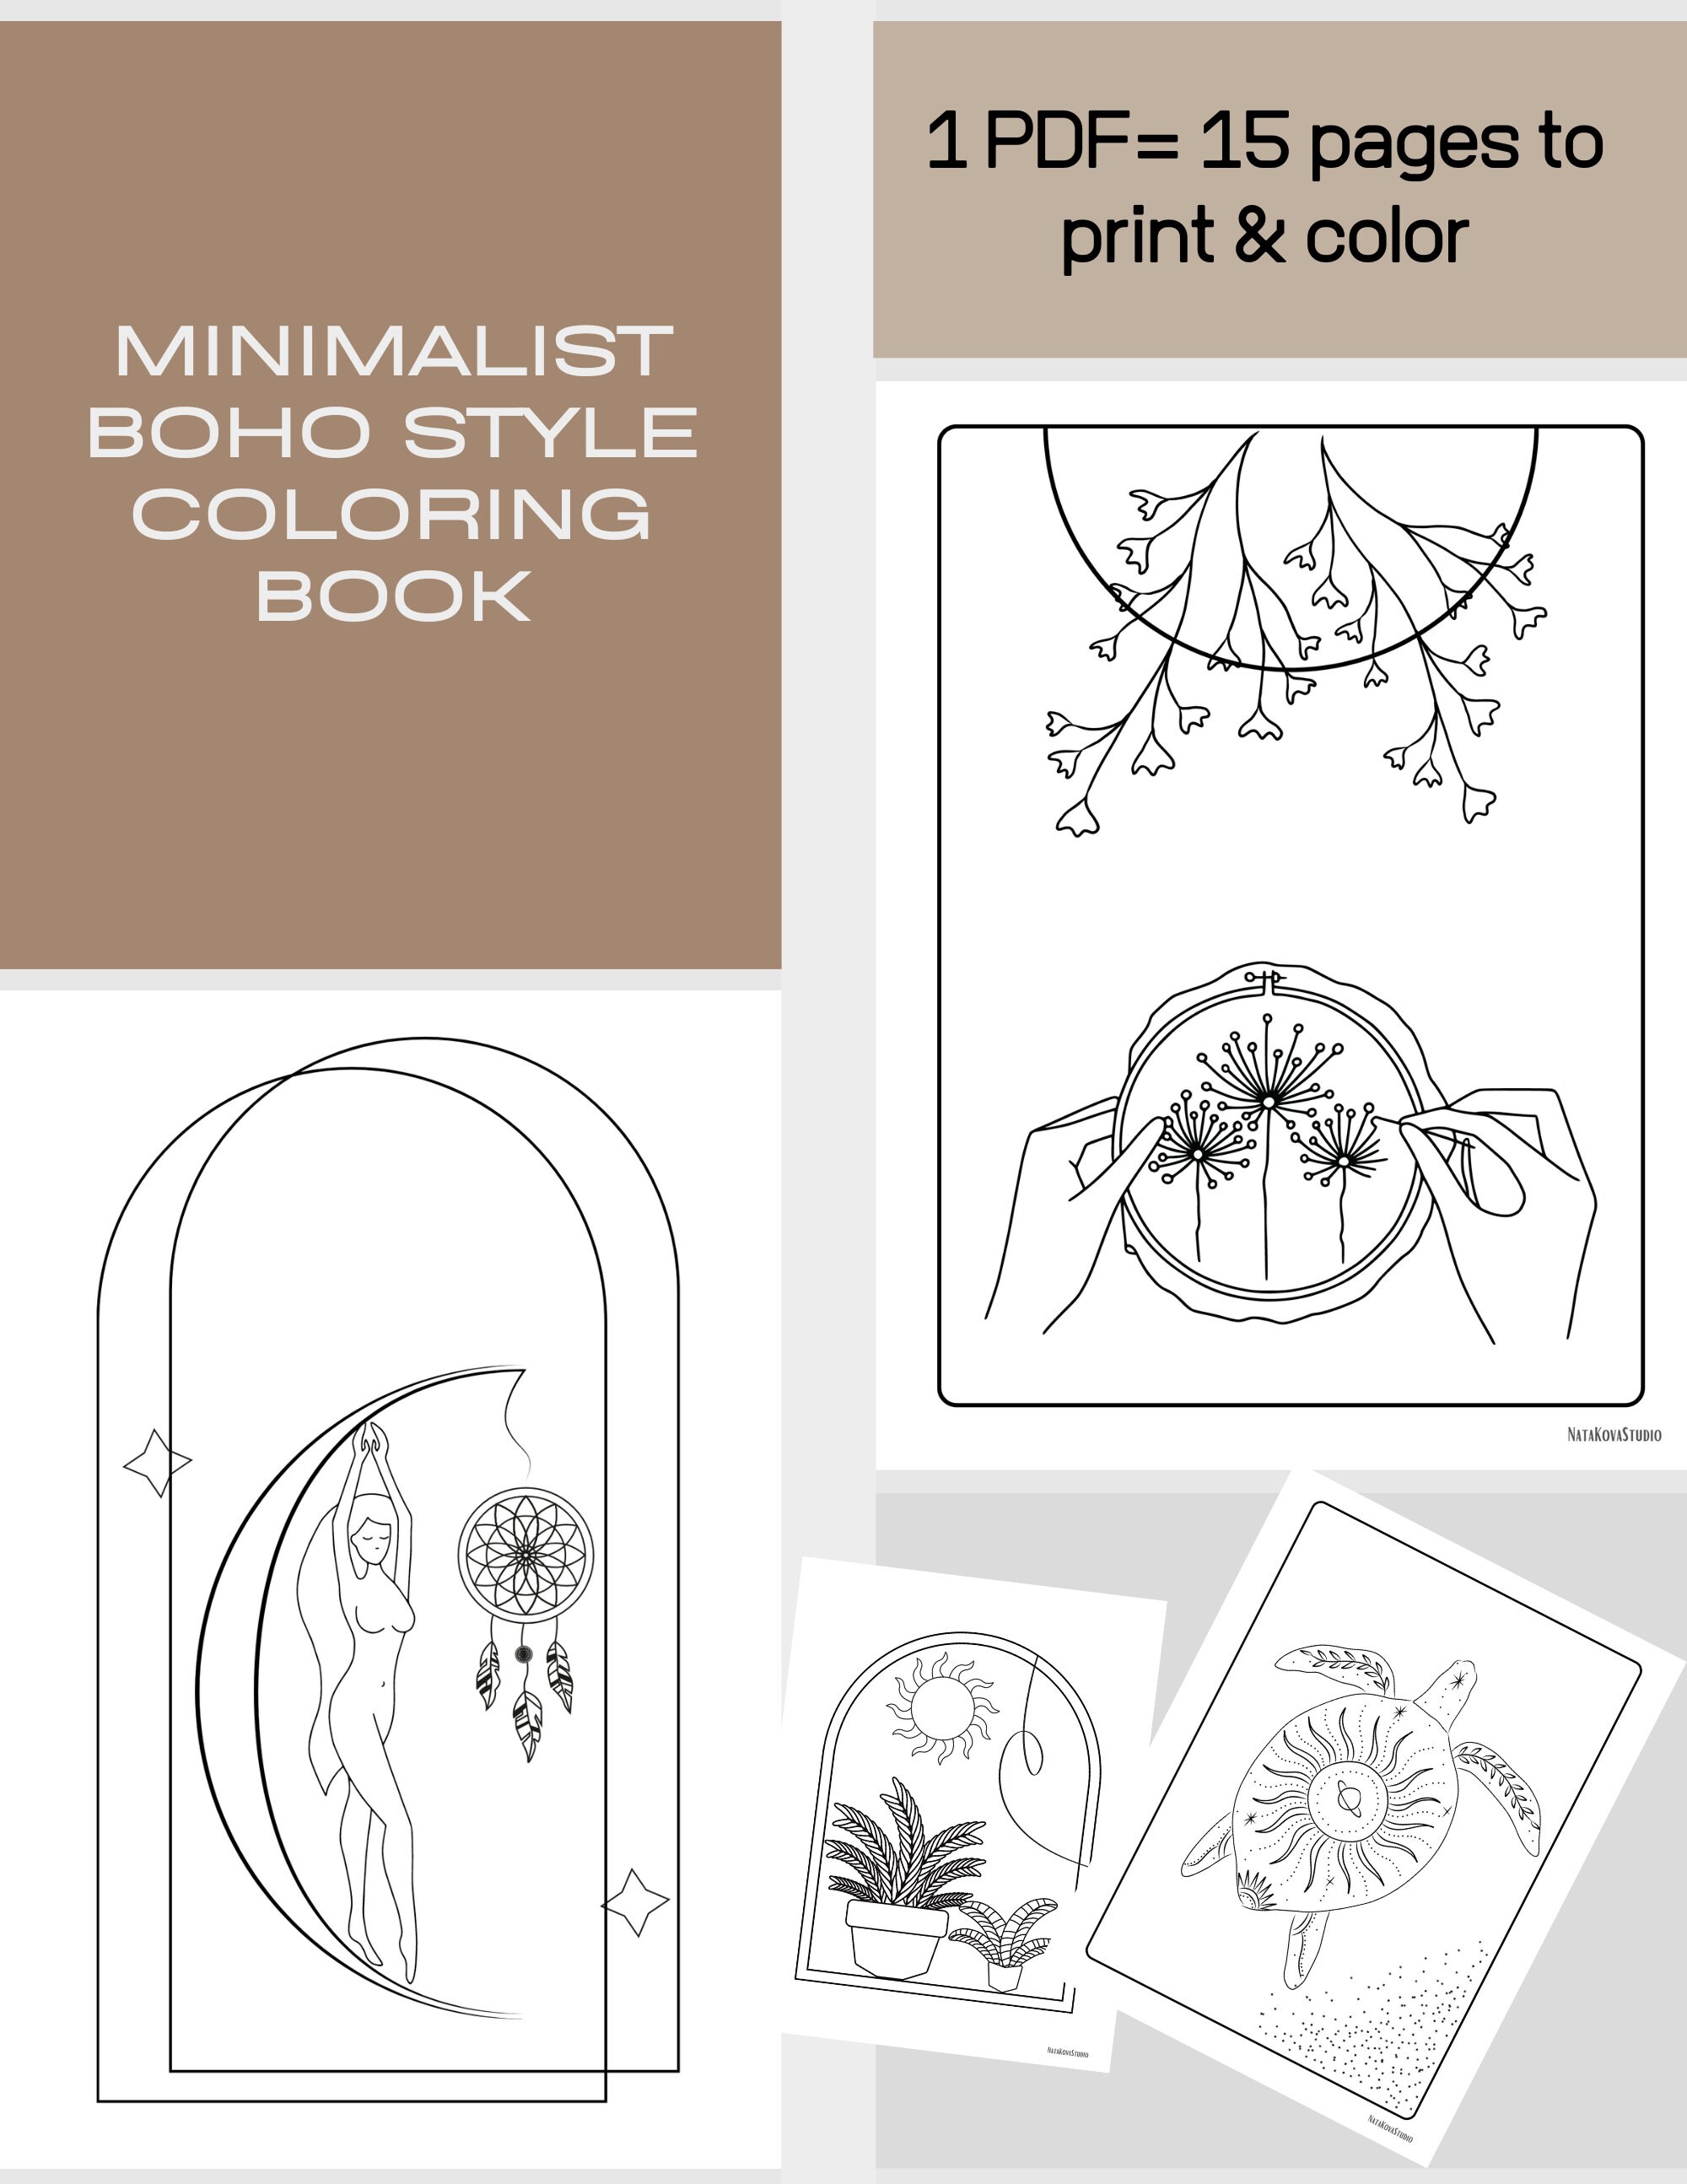 Boho Coloring Pages, Boho Coloring Book, Printable, Minimalist Printable  for Teens, Adult Coloring Sheets, Premium Coloring Pages, PDF -  Denmark